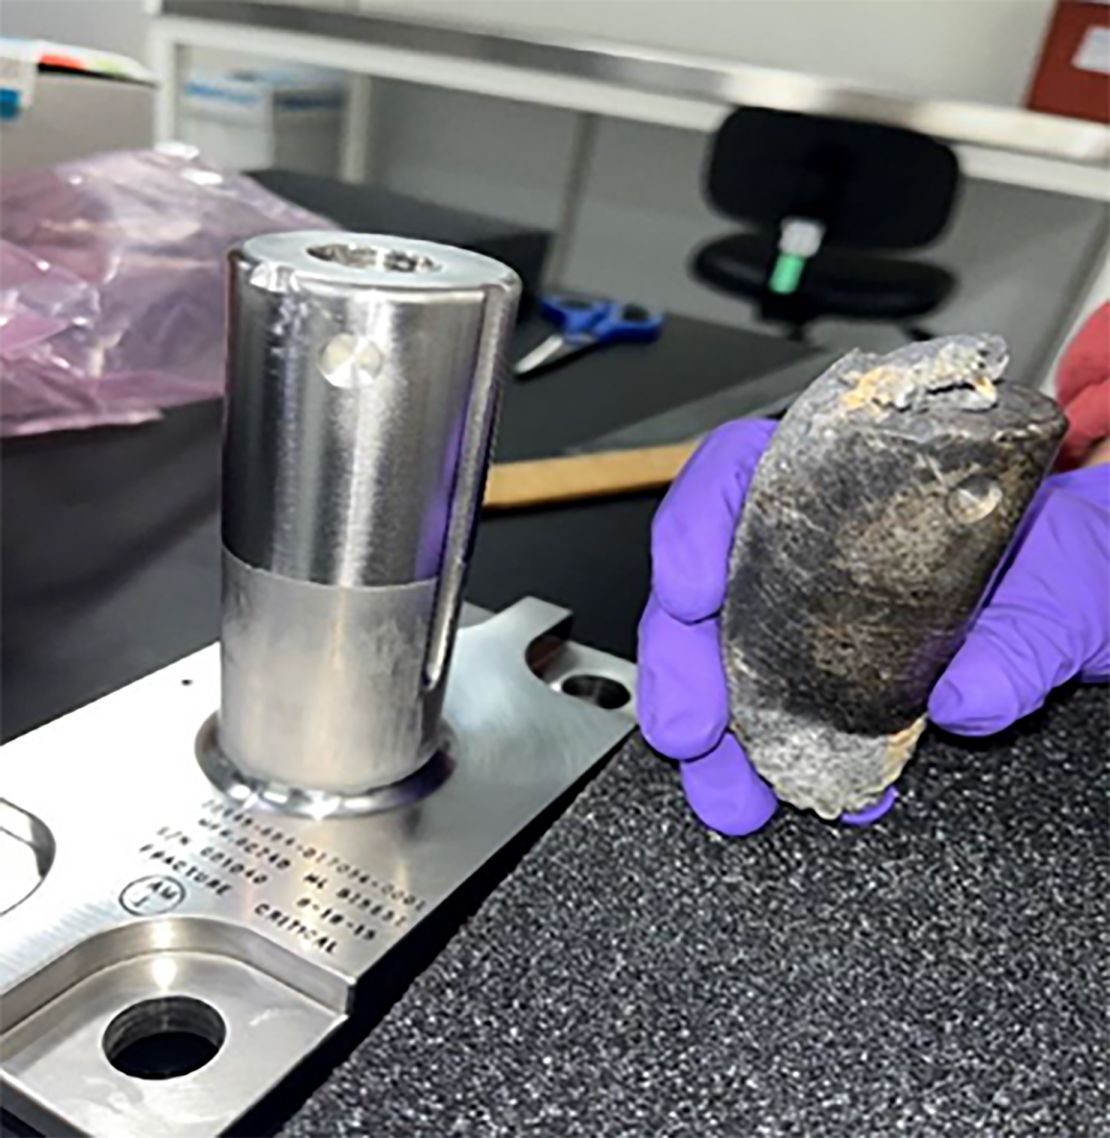 The recovered piece of space debris was part of flight support equipment that NASA used to mount International Space Station batteries on a cargo pallet. The part impacted a home in Naples, Florida.